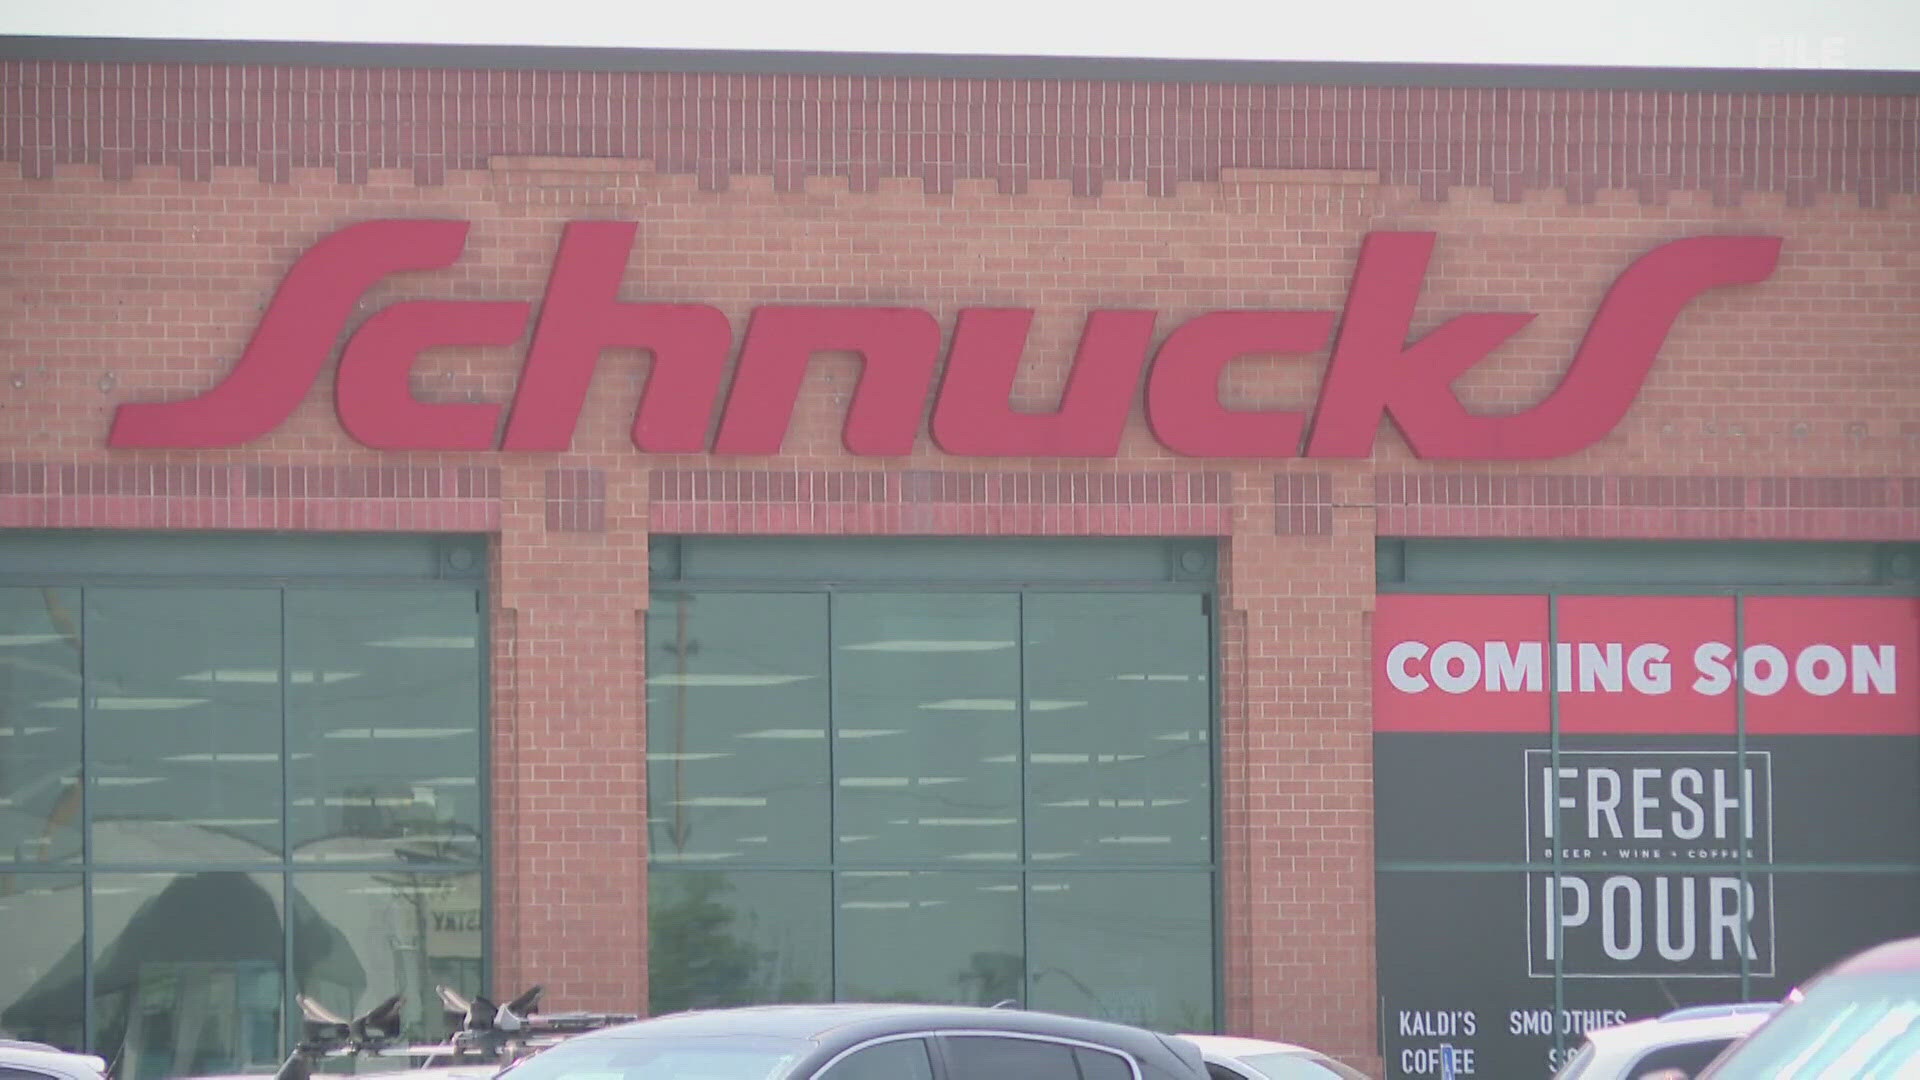 After two failed attempts at a new contract, Schnucks drivers are holding an informational picket. Union leaders demand better pay and health care benefits.